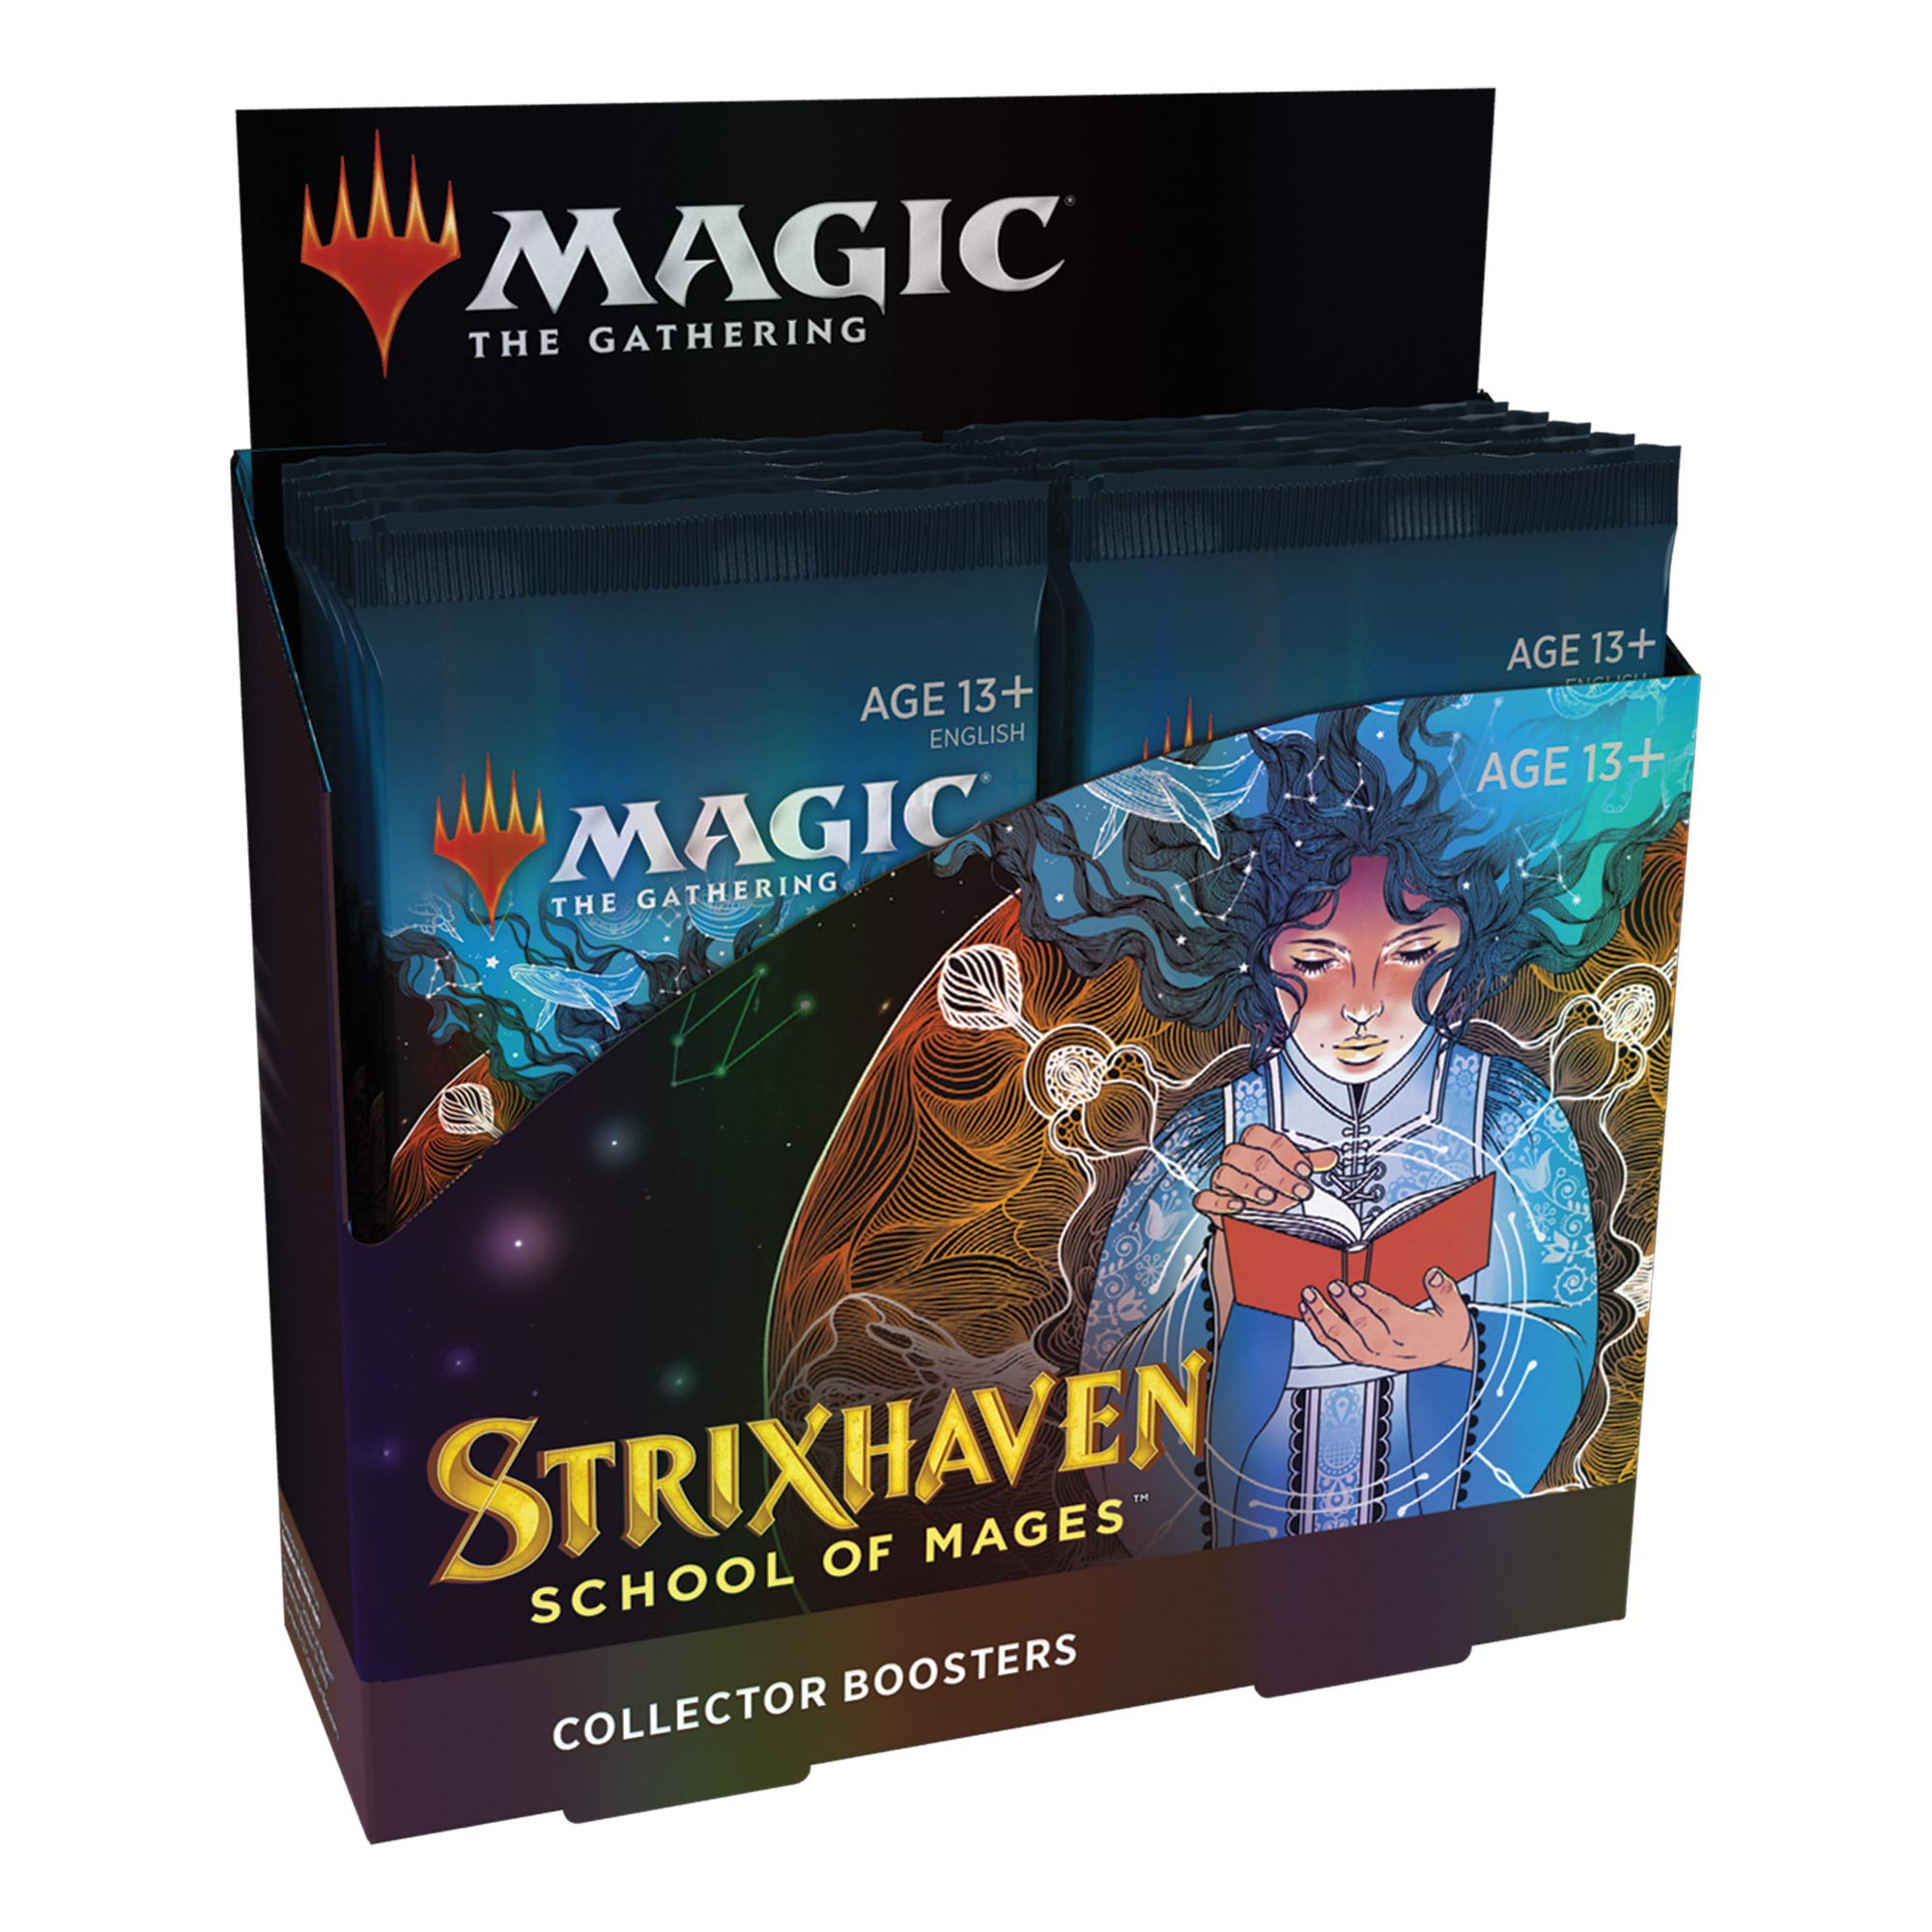 Magic The Gathering Strixhaven Collector Booster Box | 12 Packs (180 Magic Cards)